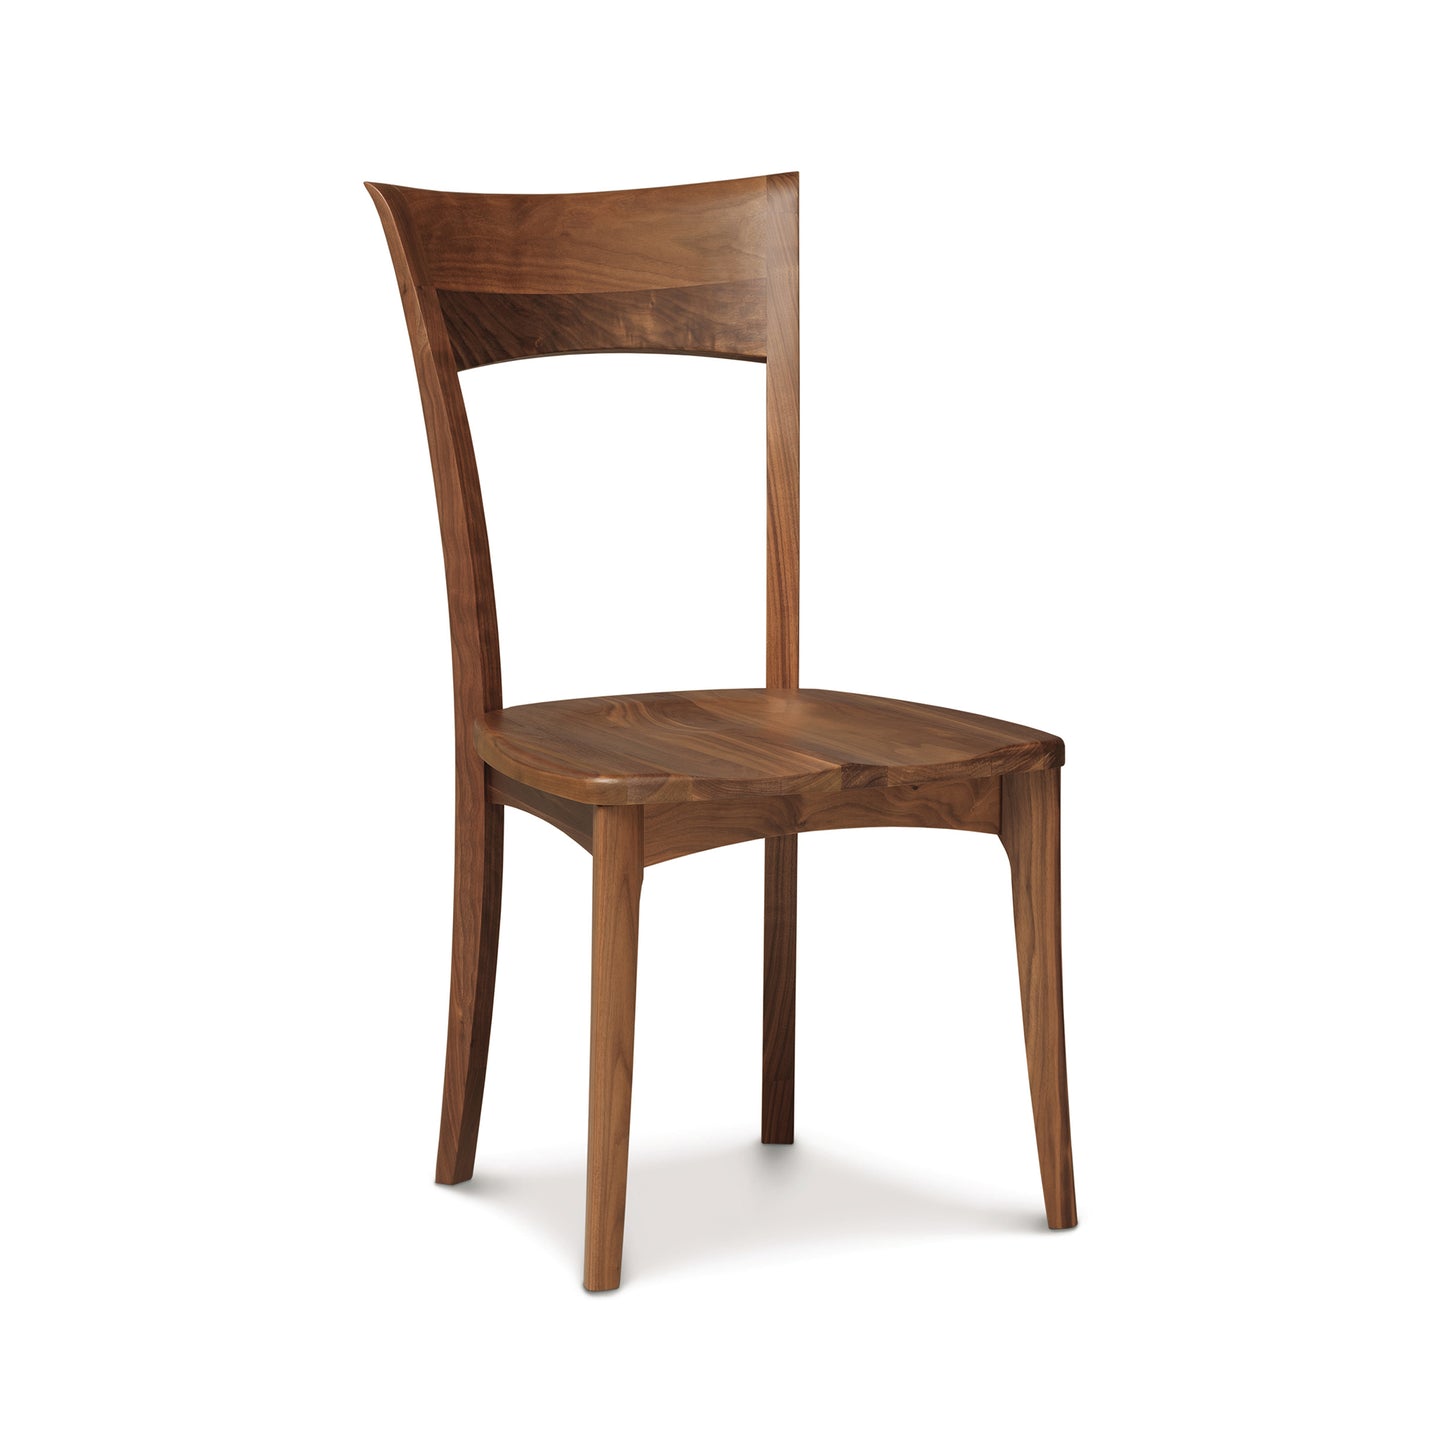 A Ingrid Shaker Chair with Wood Seat dining chair with a curved backrest, isolated on a white background. (Brand: Copeland Furniture)